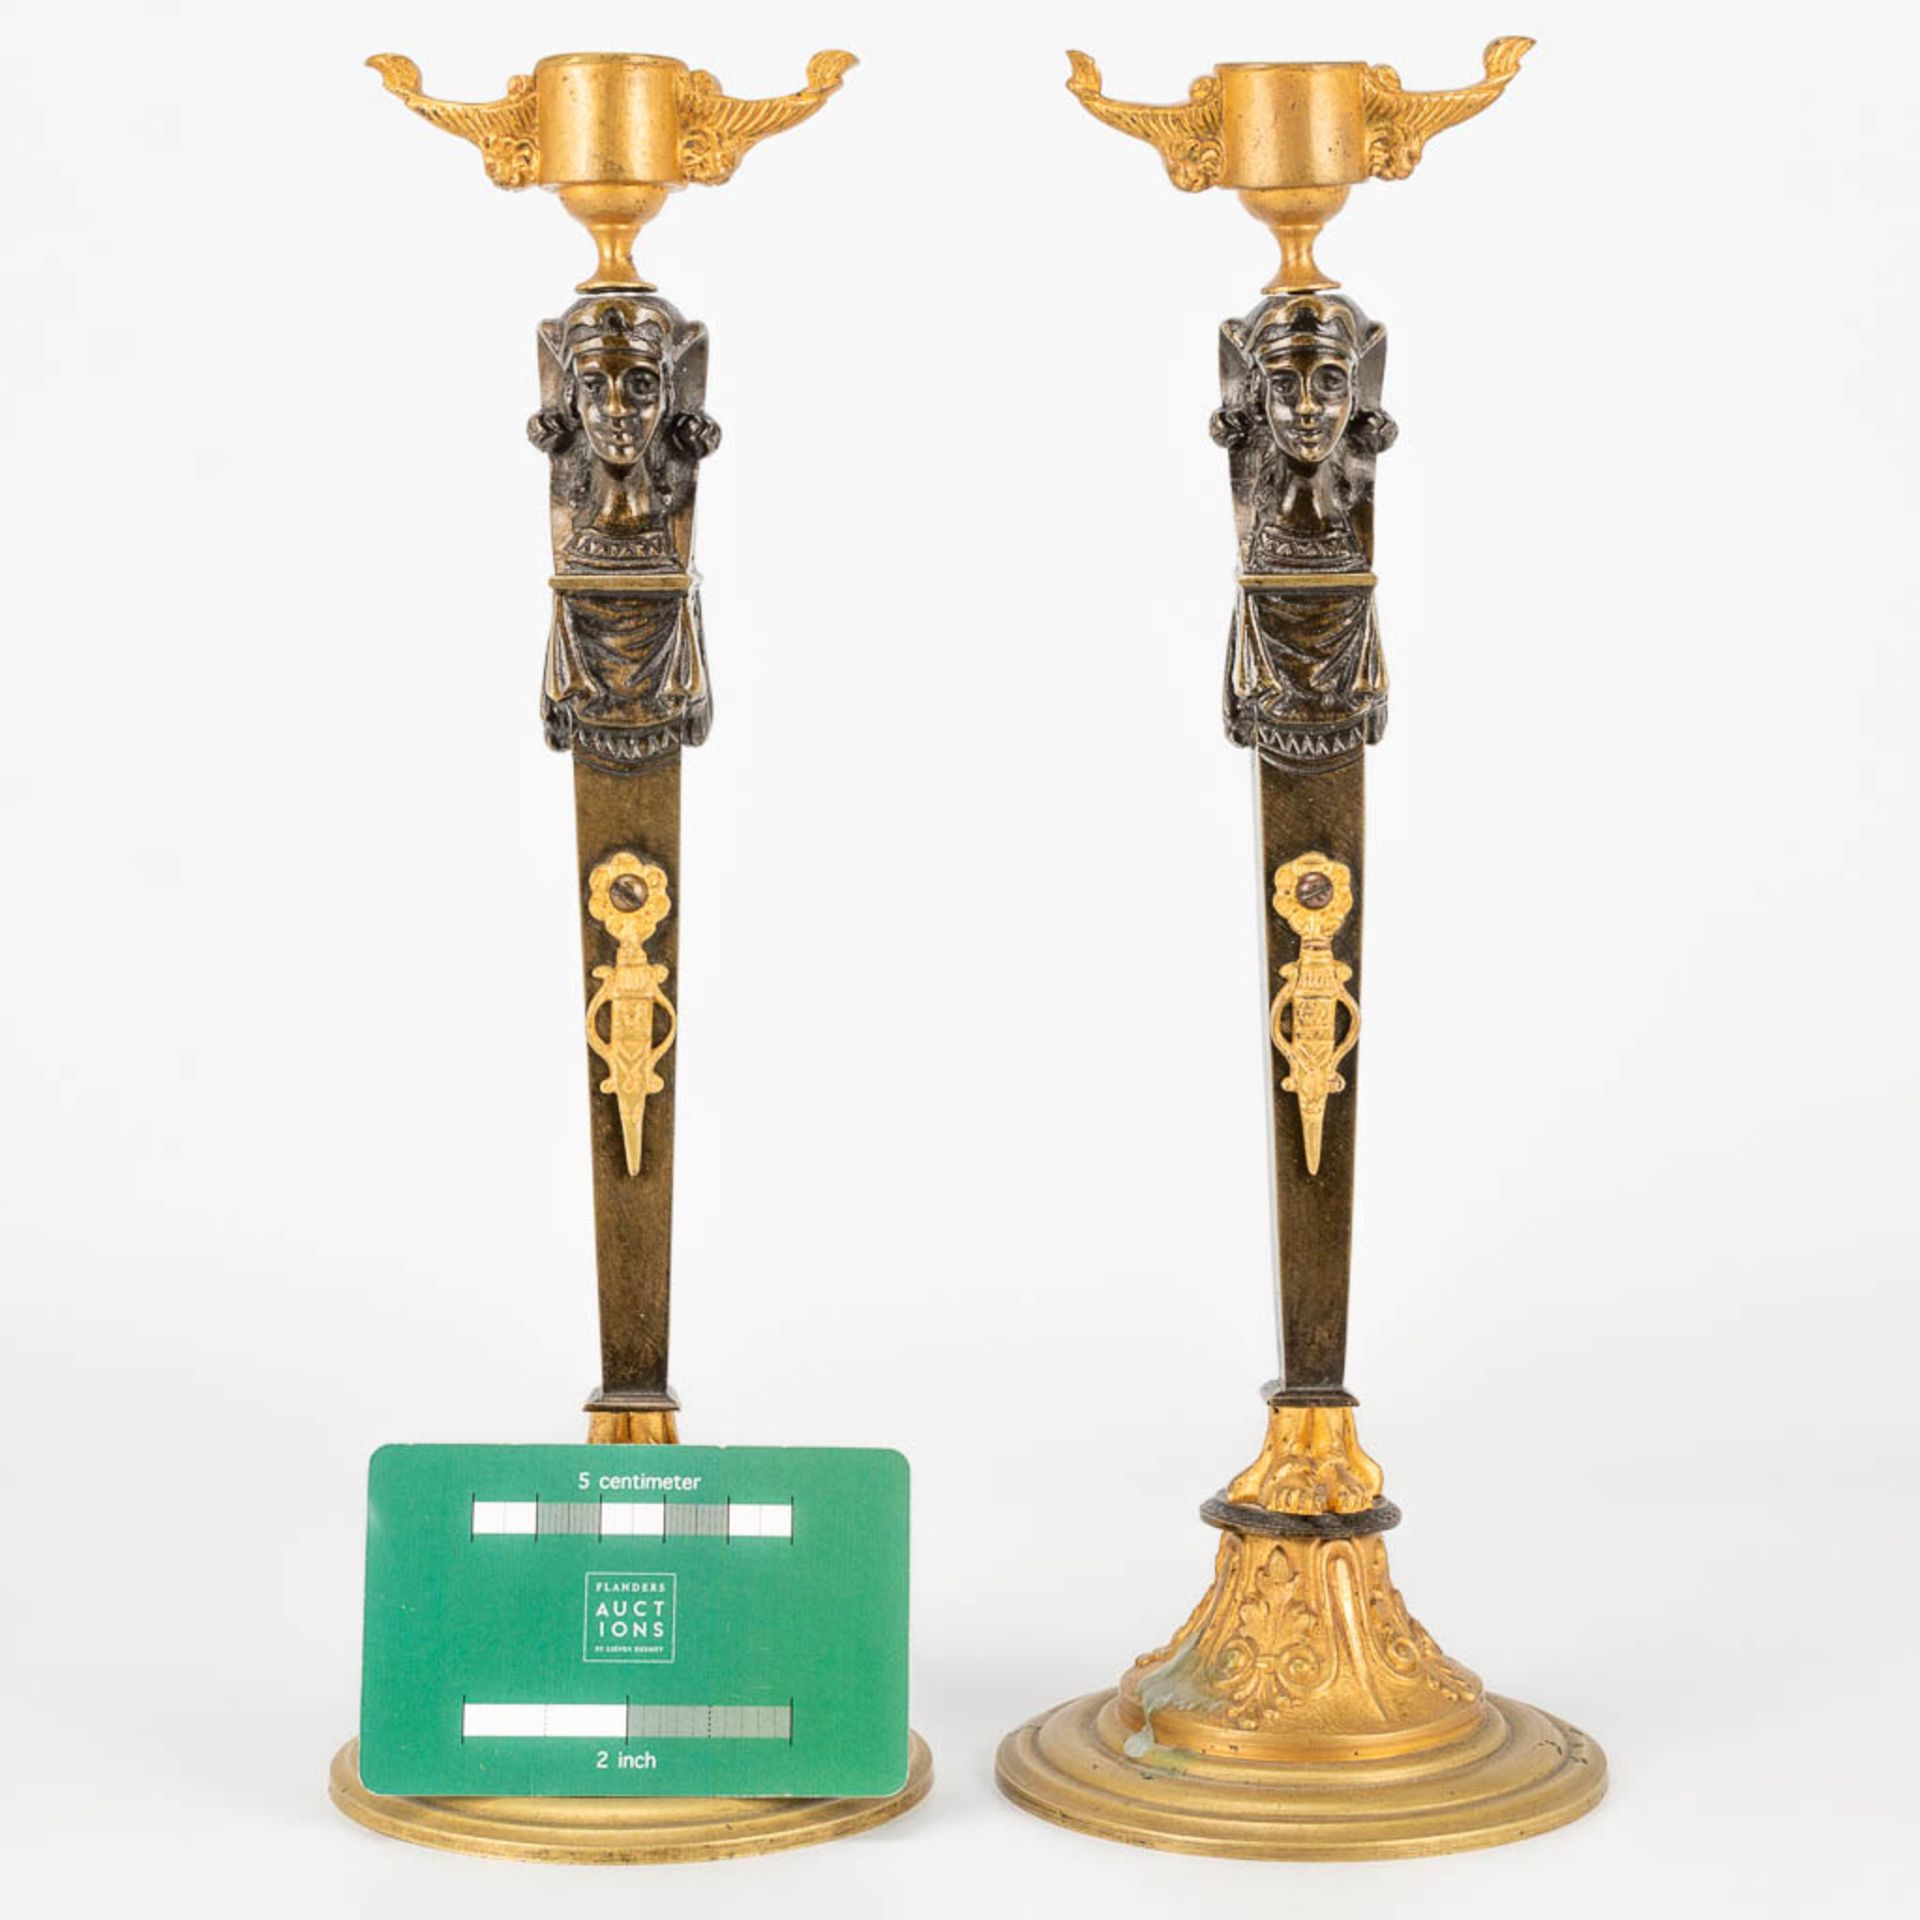 A pair of candlesticks made of gilt and patinated bronze in empire style. (27,5 x 9,5 cm) - Image 11 of 15